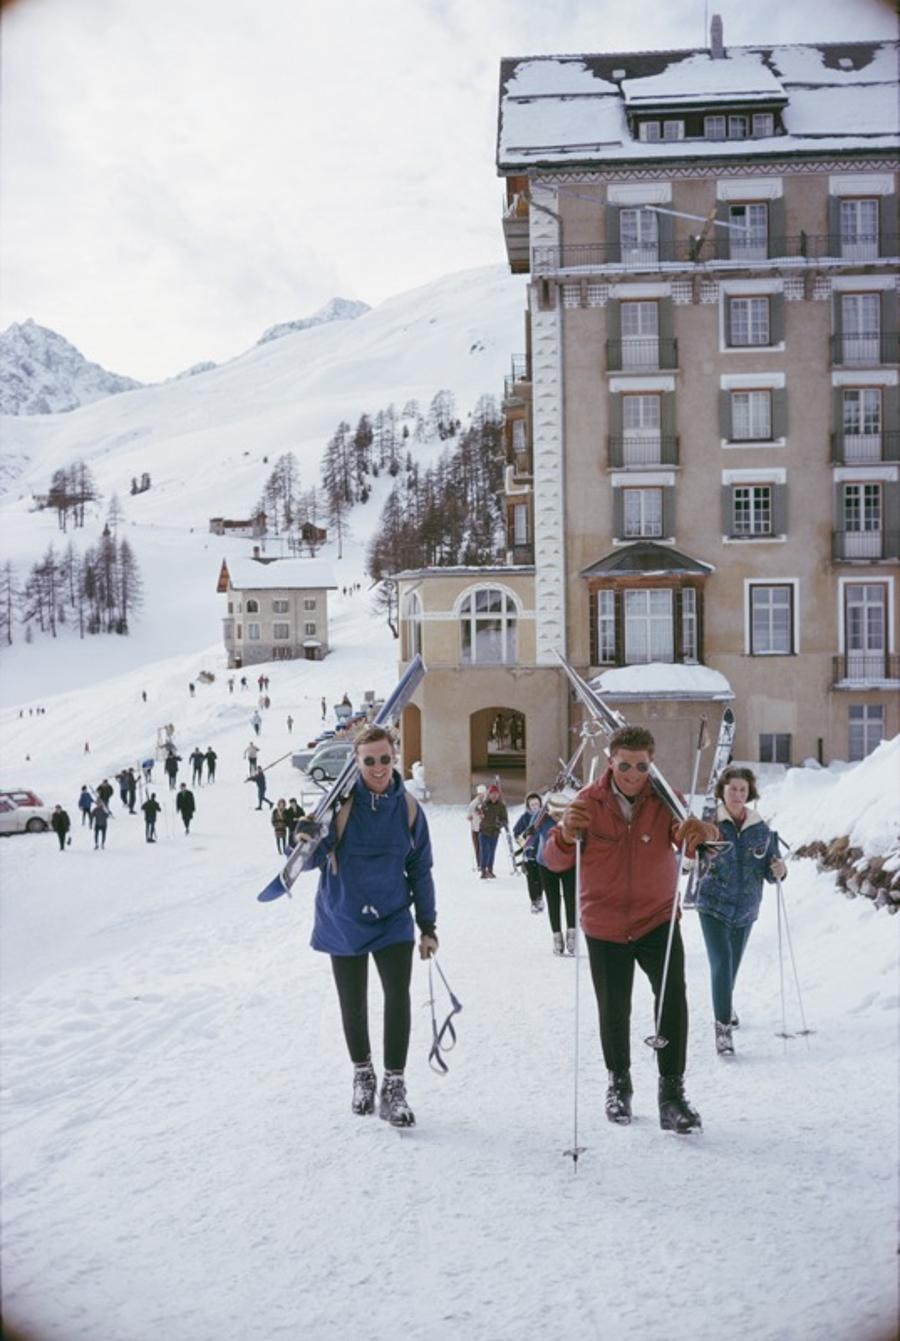 Skiers in St Moritz 
1963
by Slim Aarons

Slim Aarons Limited Estate Edition

Skiers in St Moritz, Switzerland, March 1963.

unframed
c type print
printed 2023
24 x 20"  - paper size

Limited to 150 prints only – regardless of paper size

blind